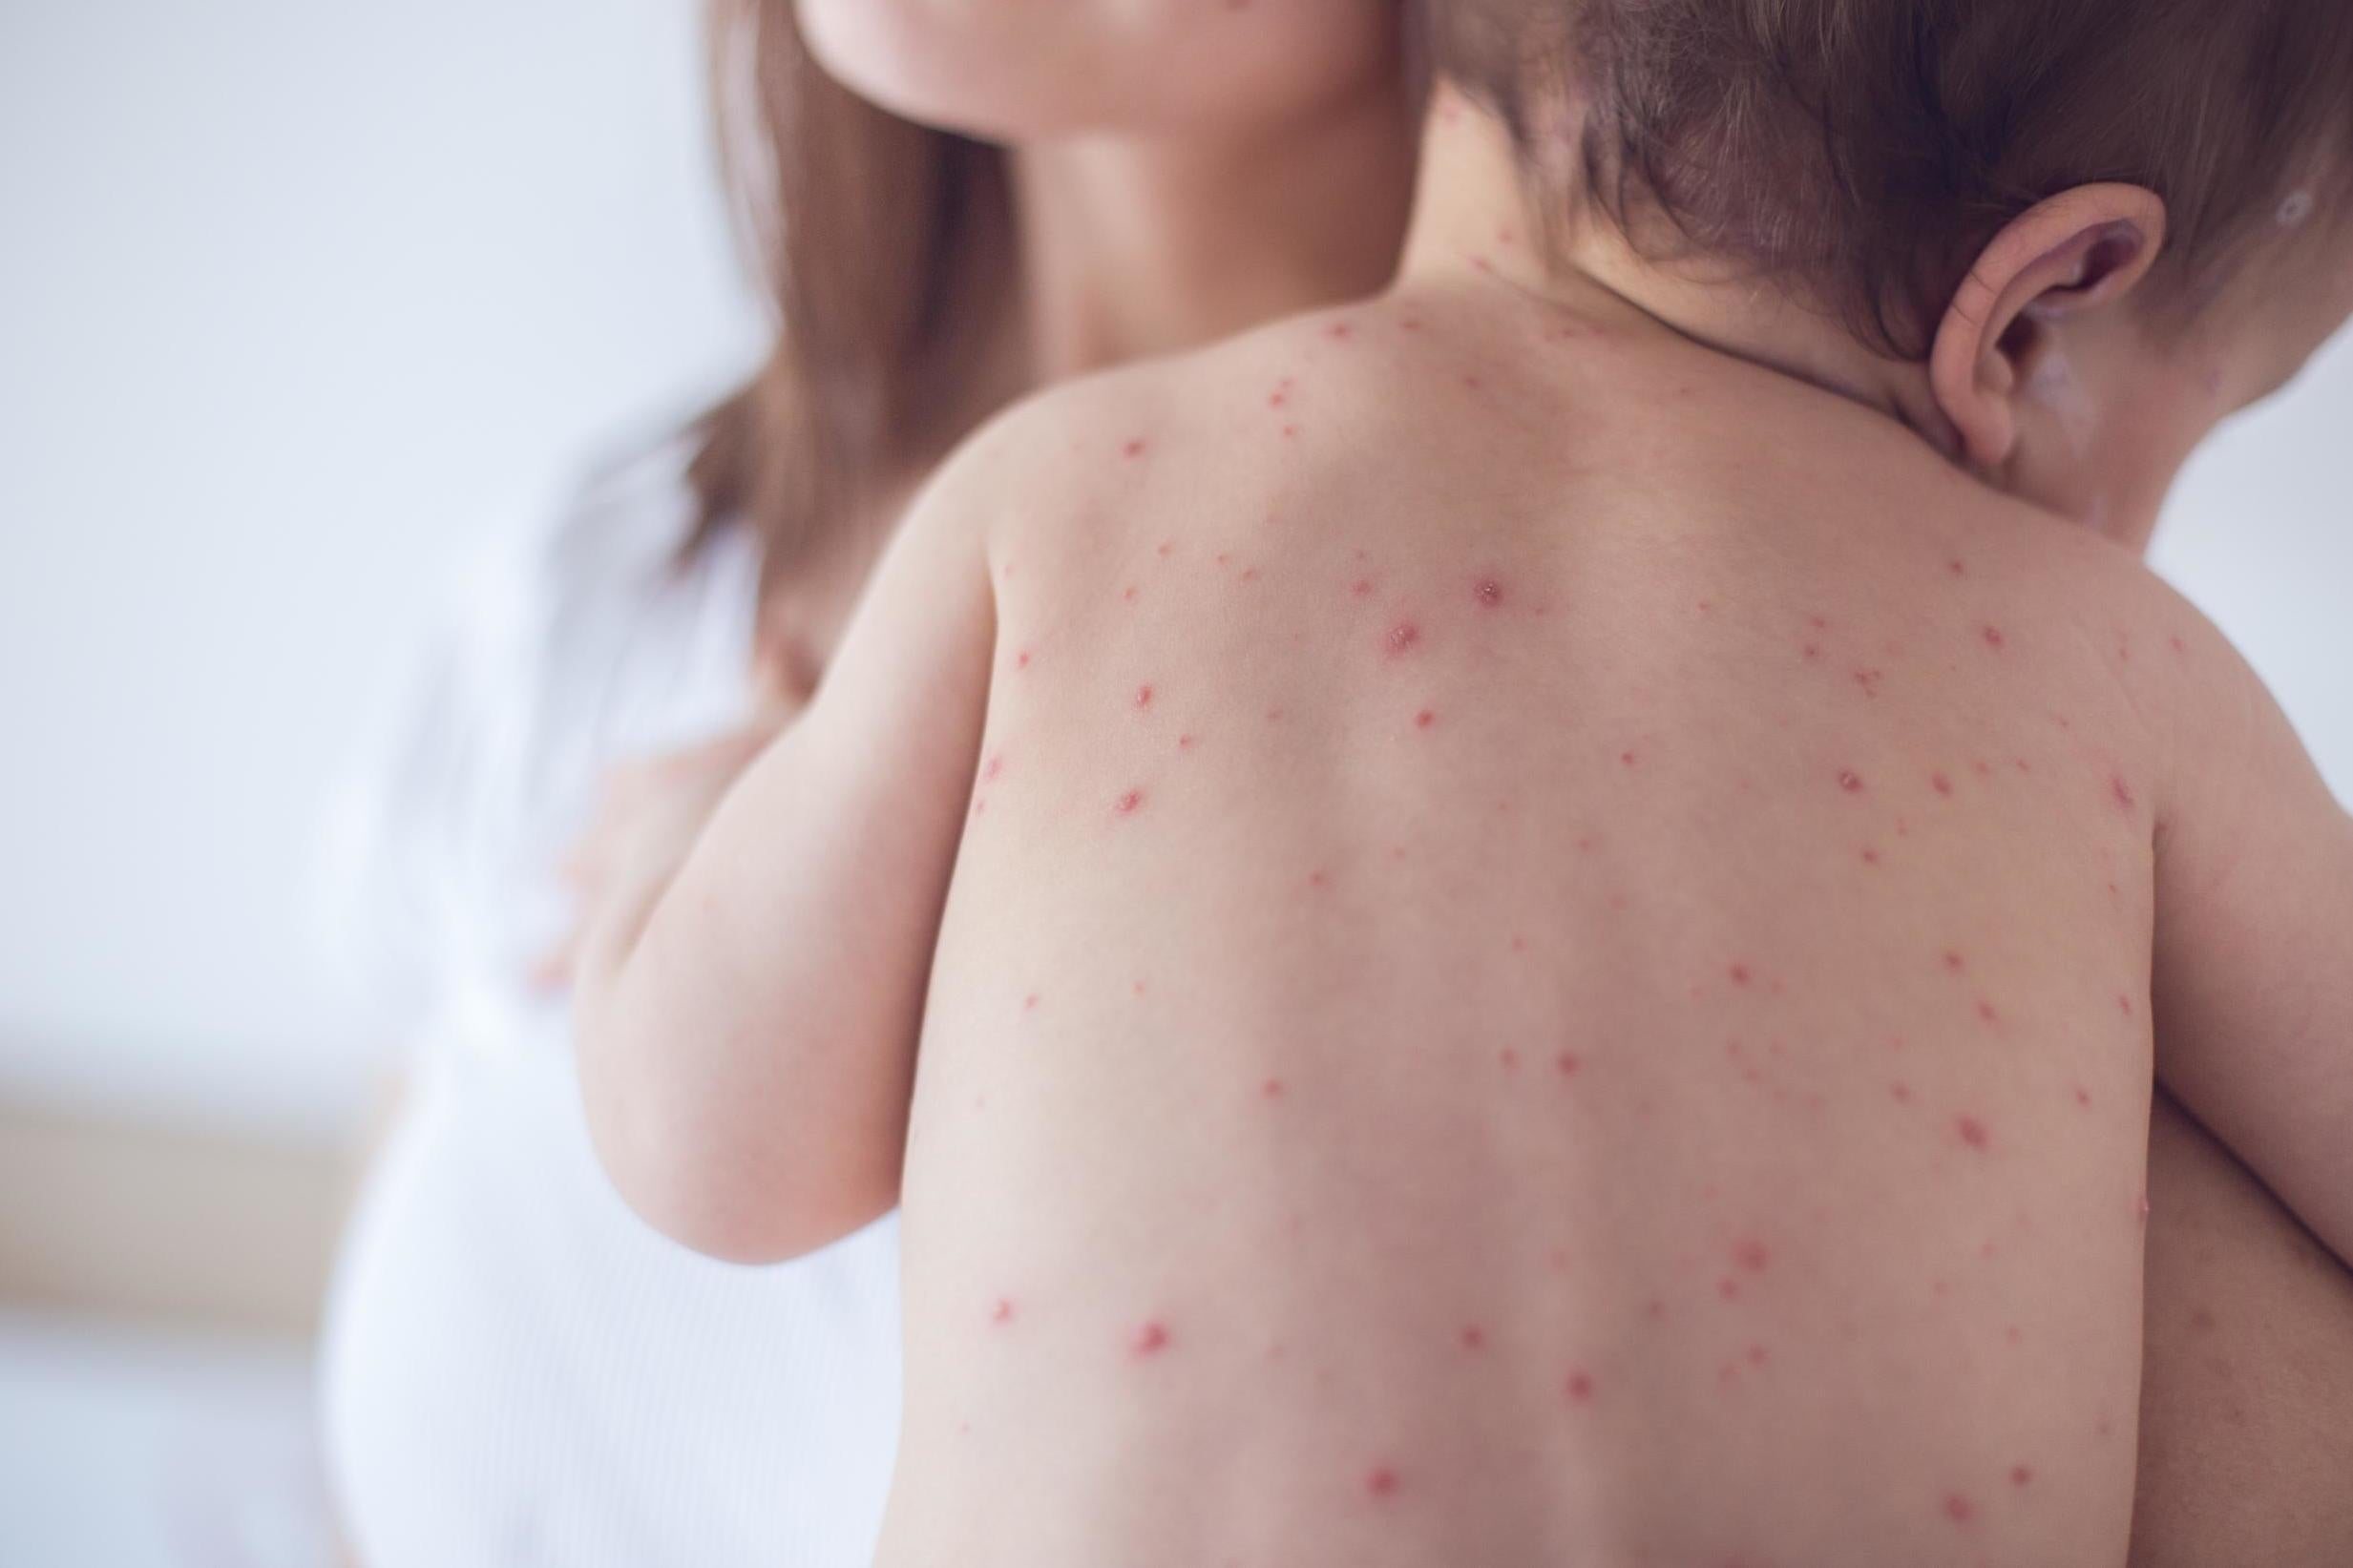 Measles is a highly-contagious viral infection that causes a red rash as one of the symptoms